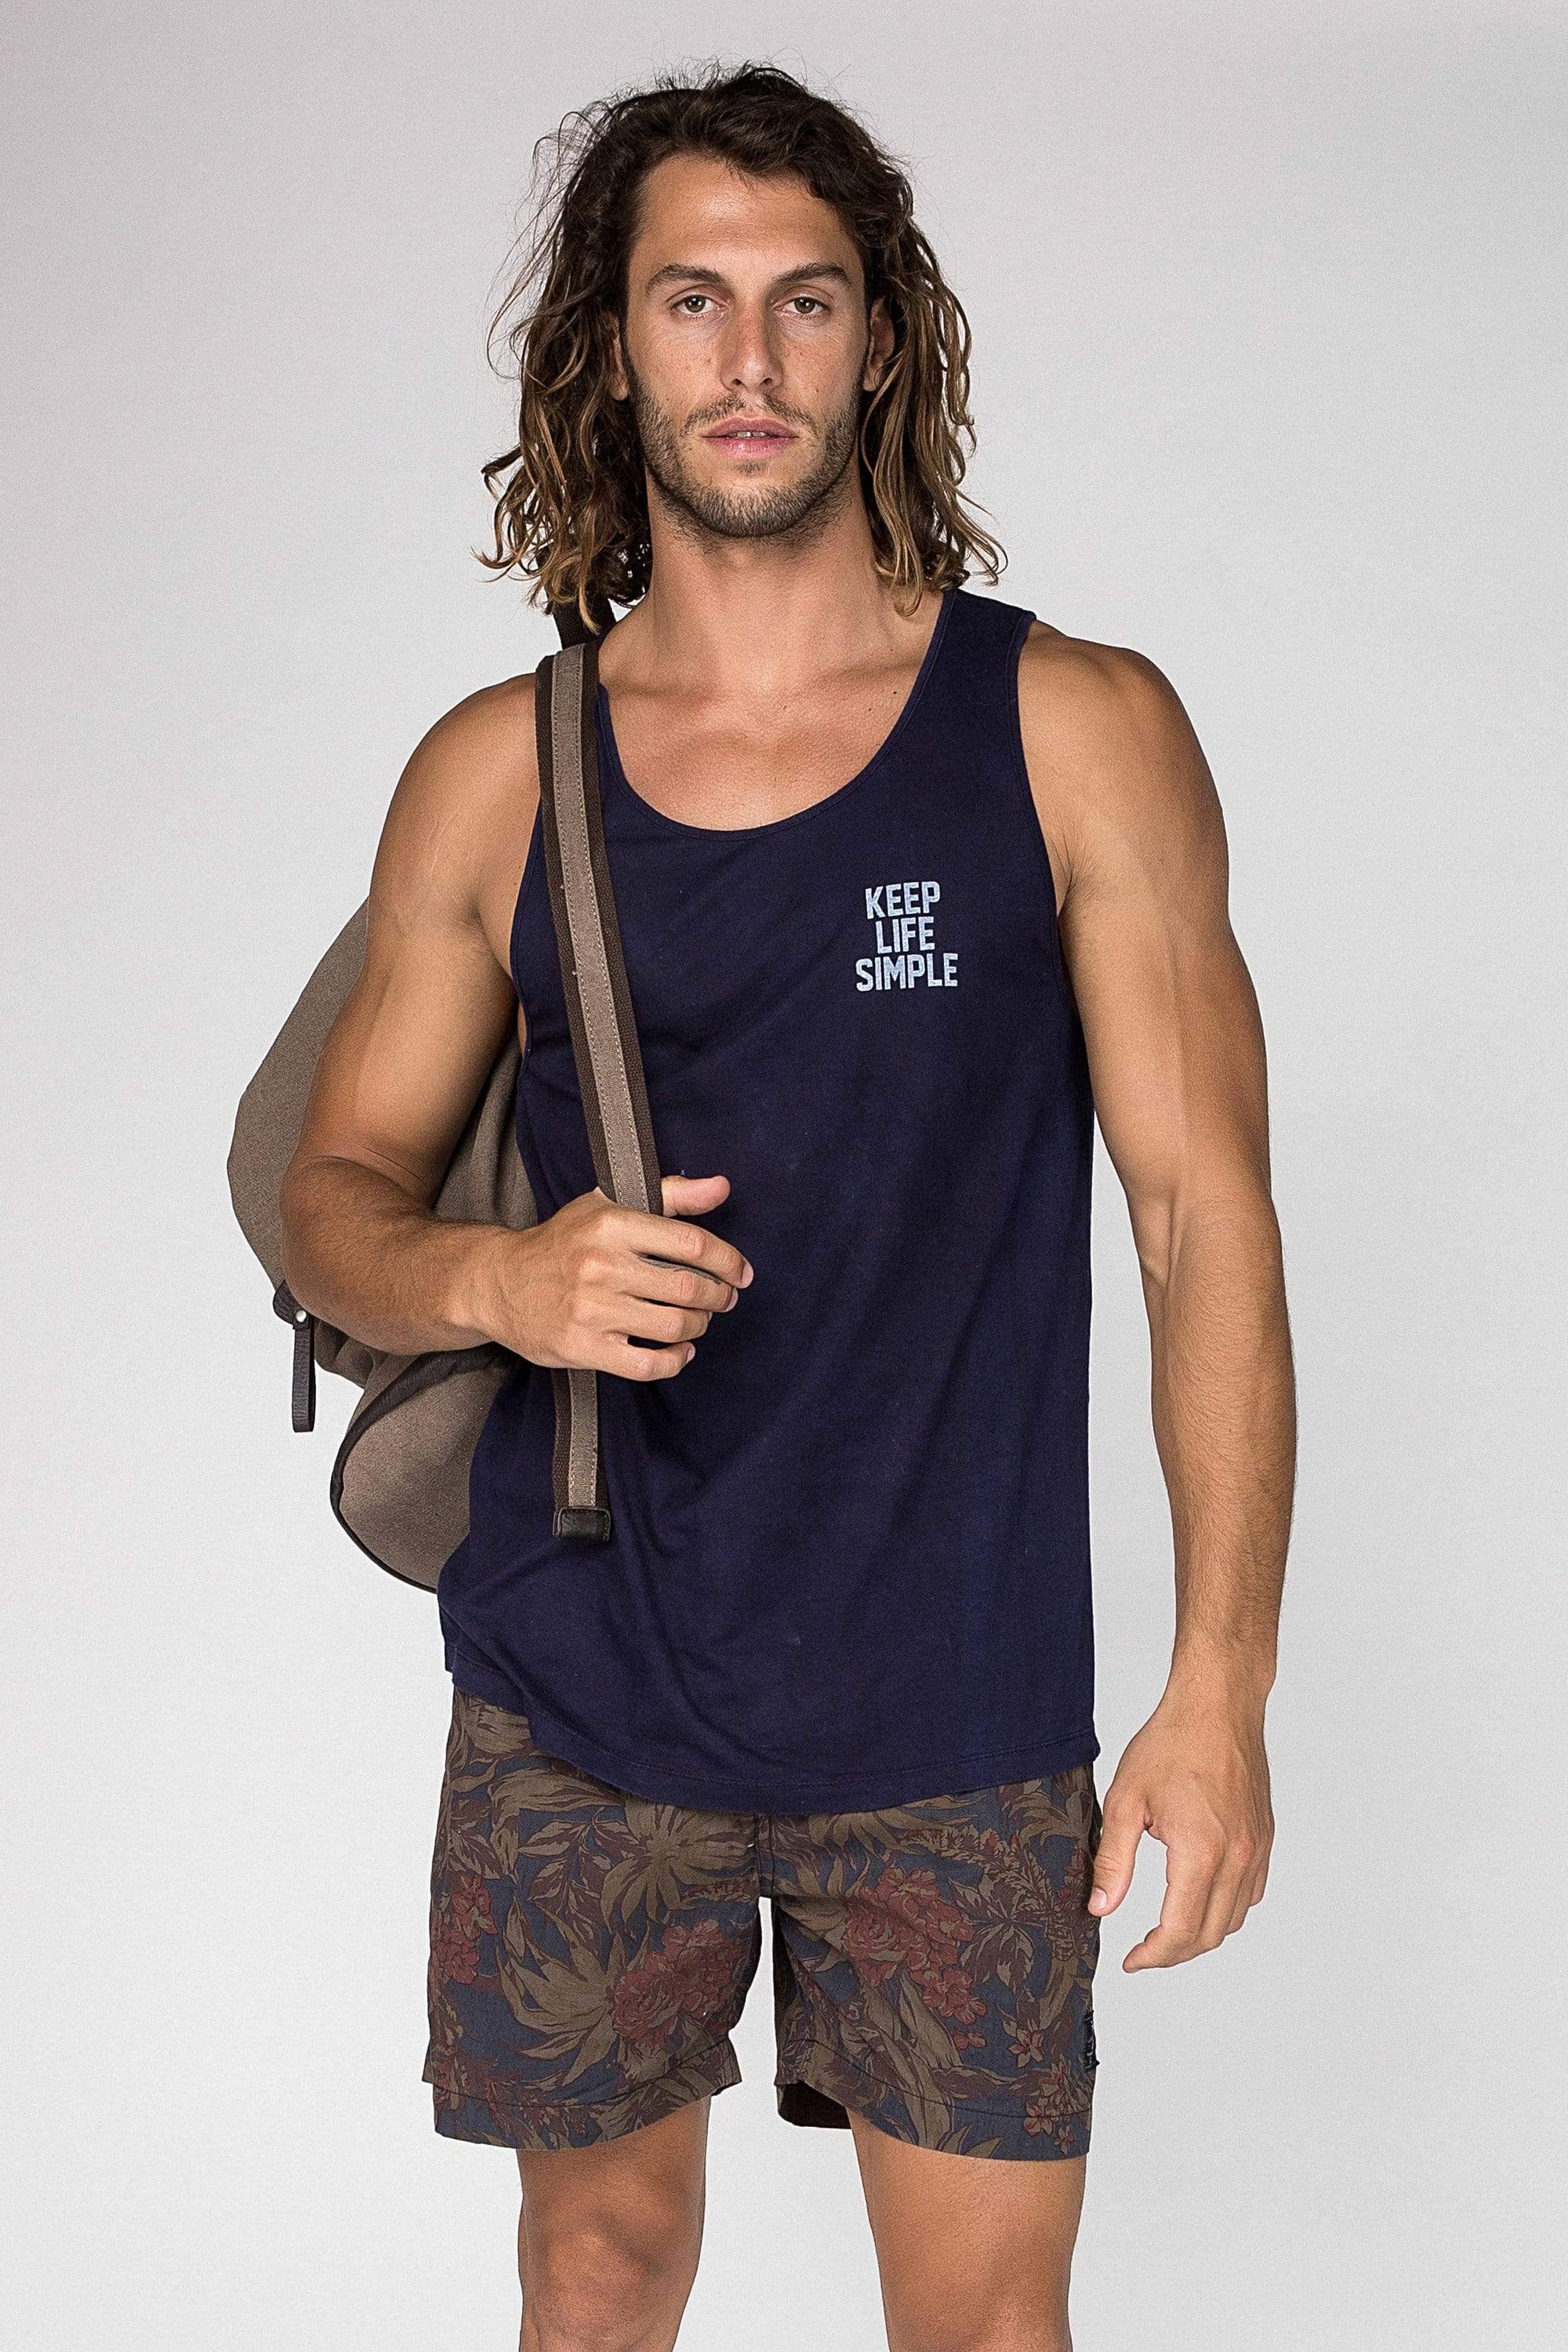 Sing Go Surf - Mens Muscle Tank - LOST IN PARADISE